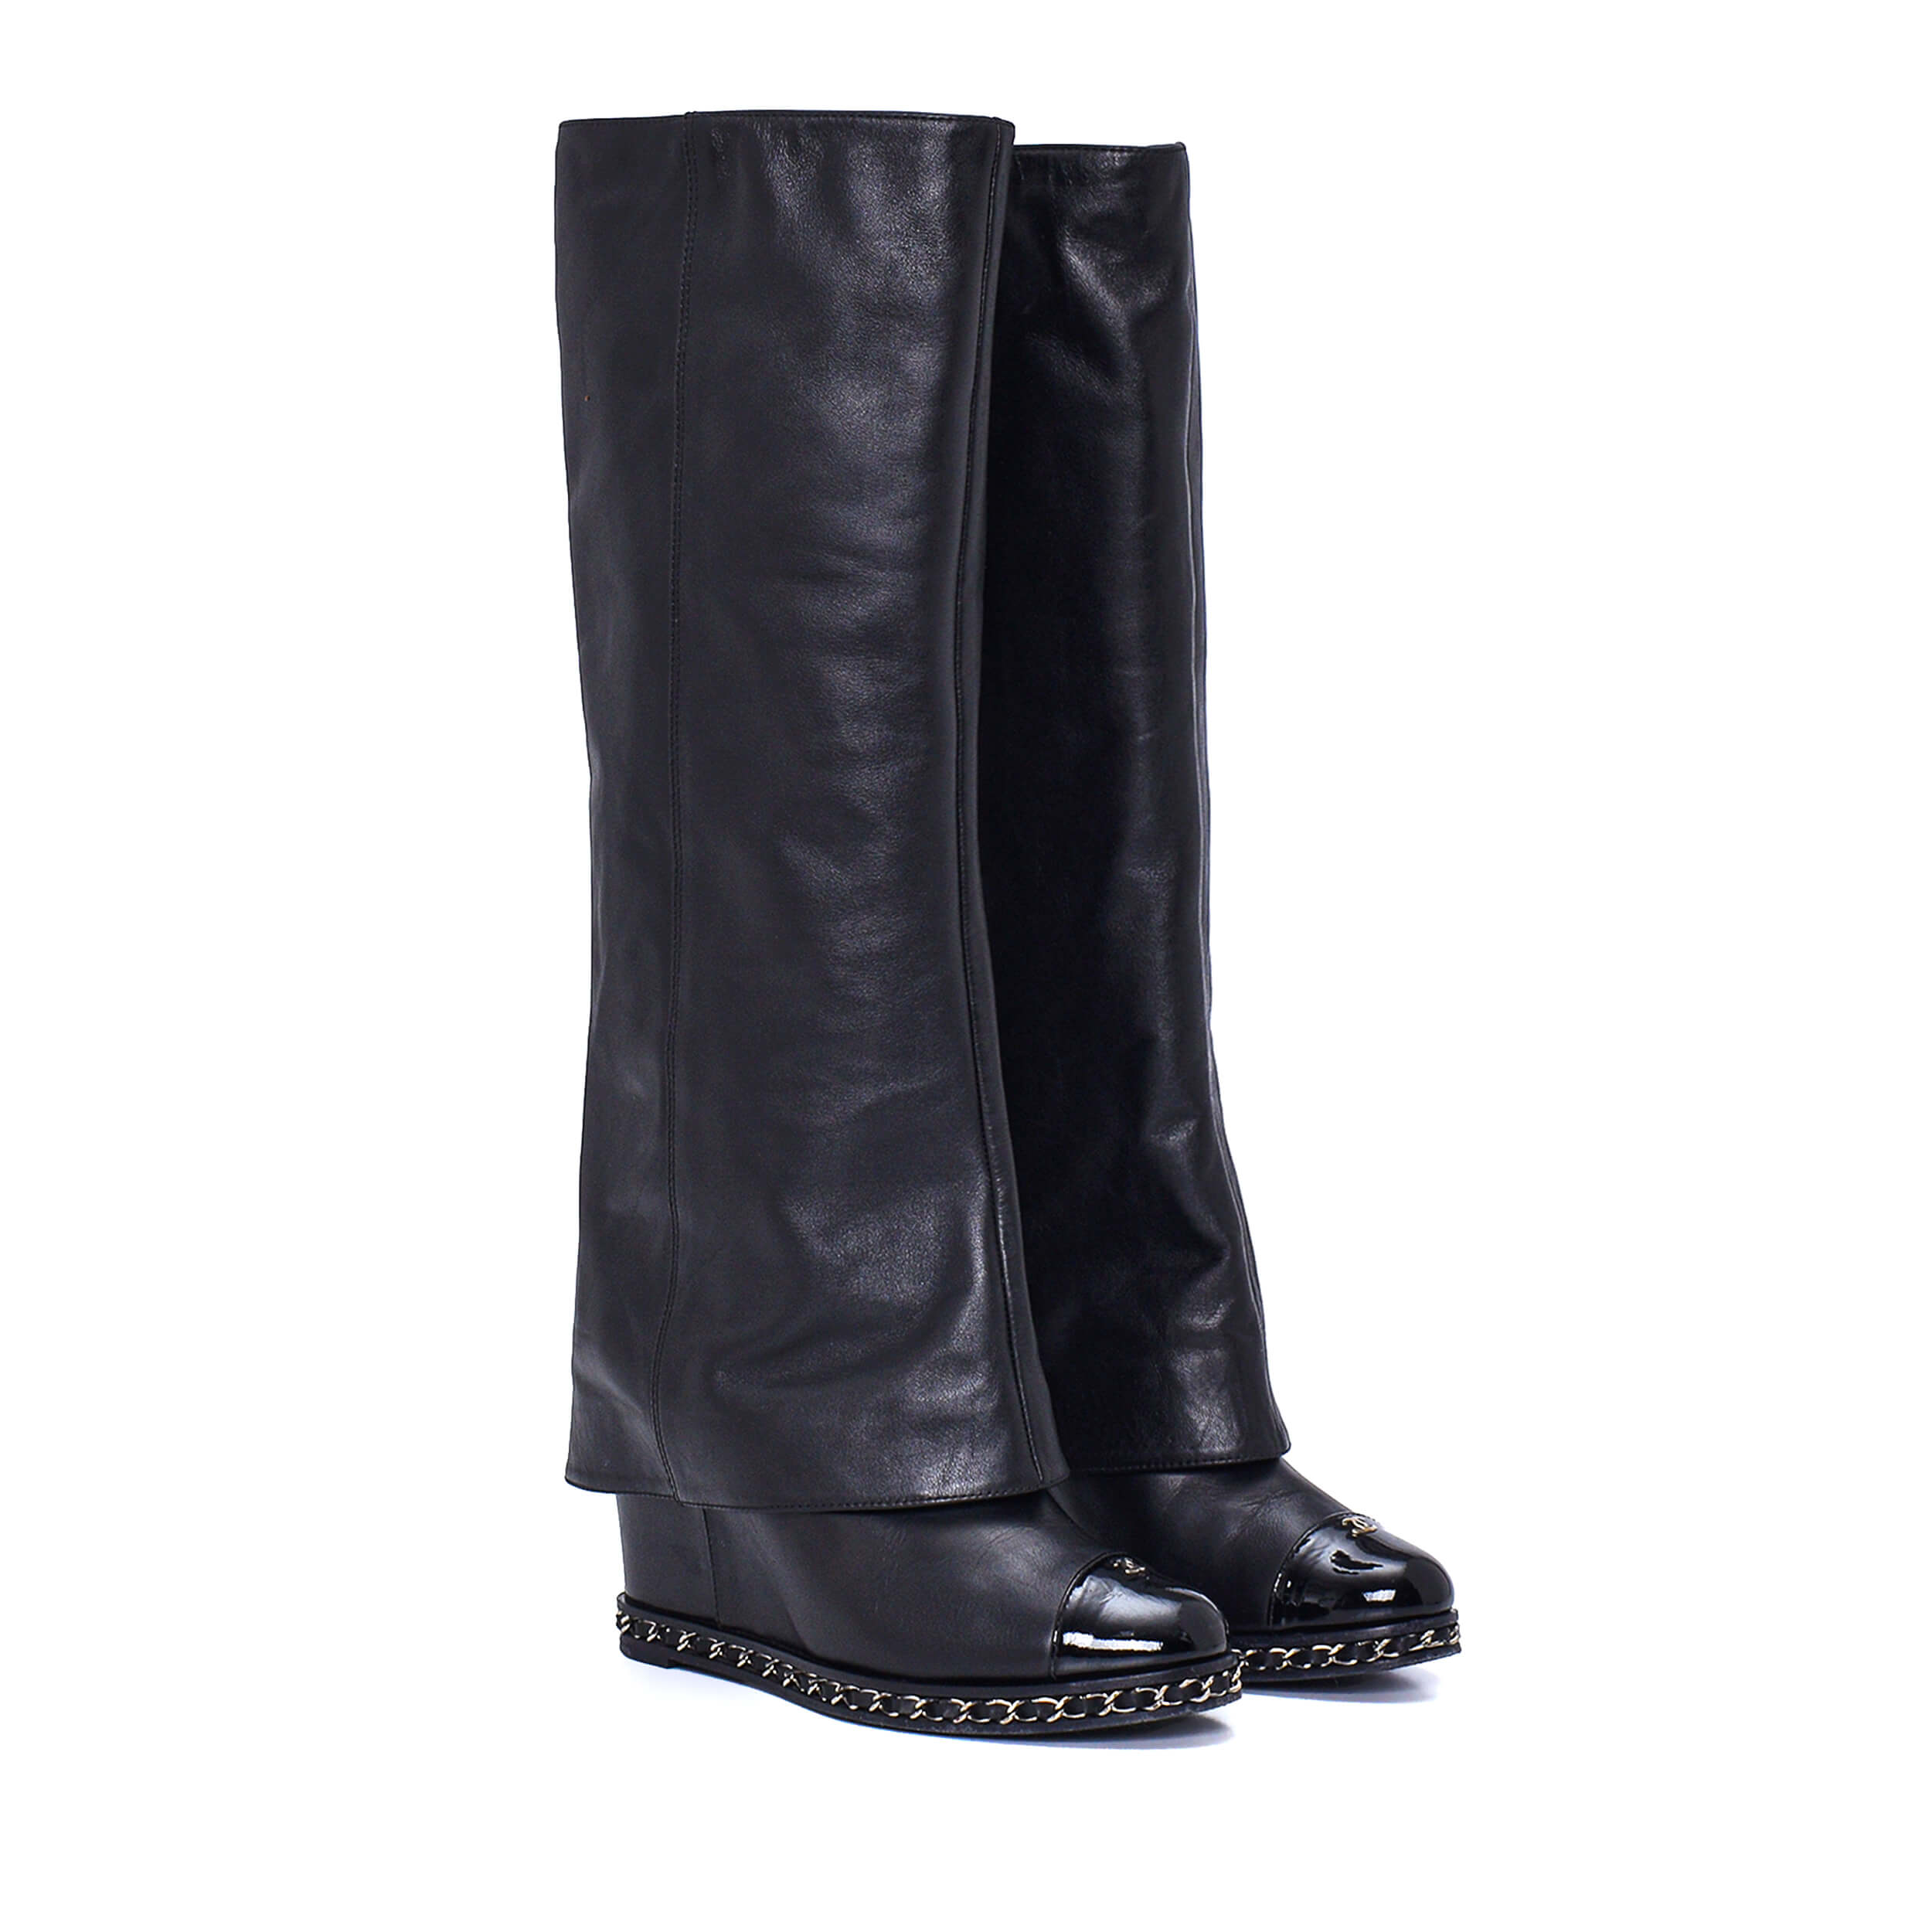 Chanel - Black Leather Fold Over Toe Cap Chain Wedge Boots